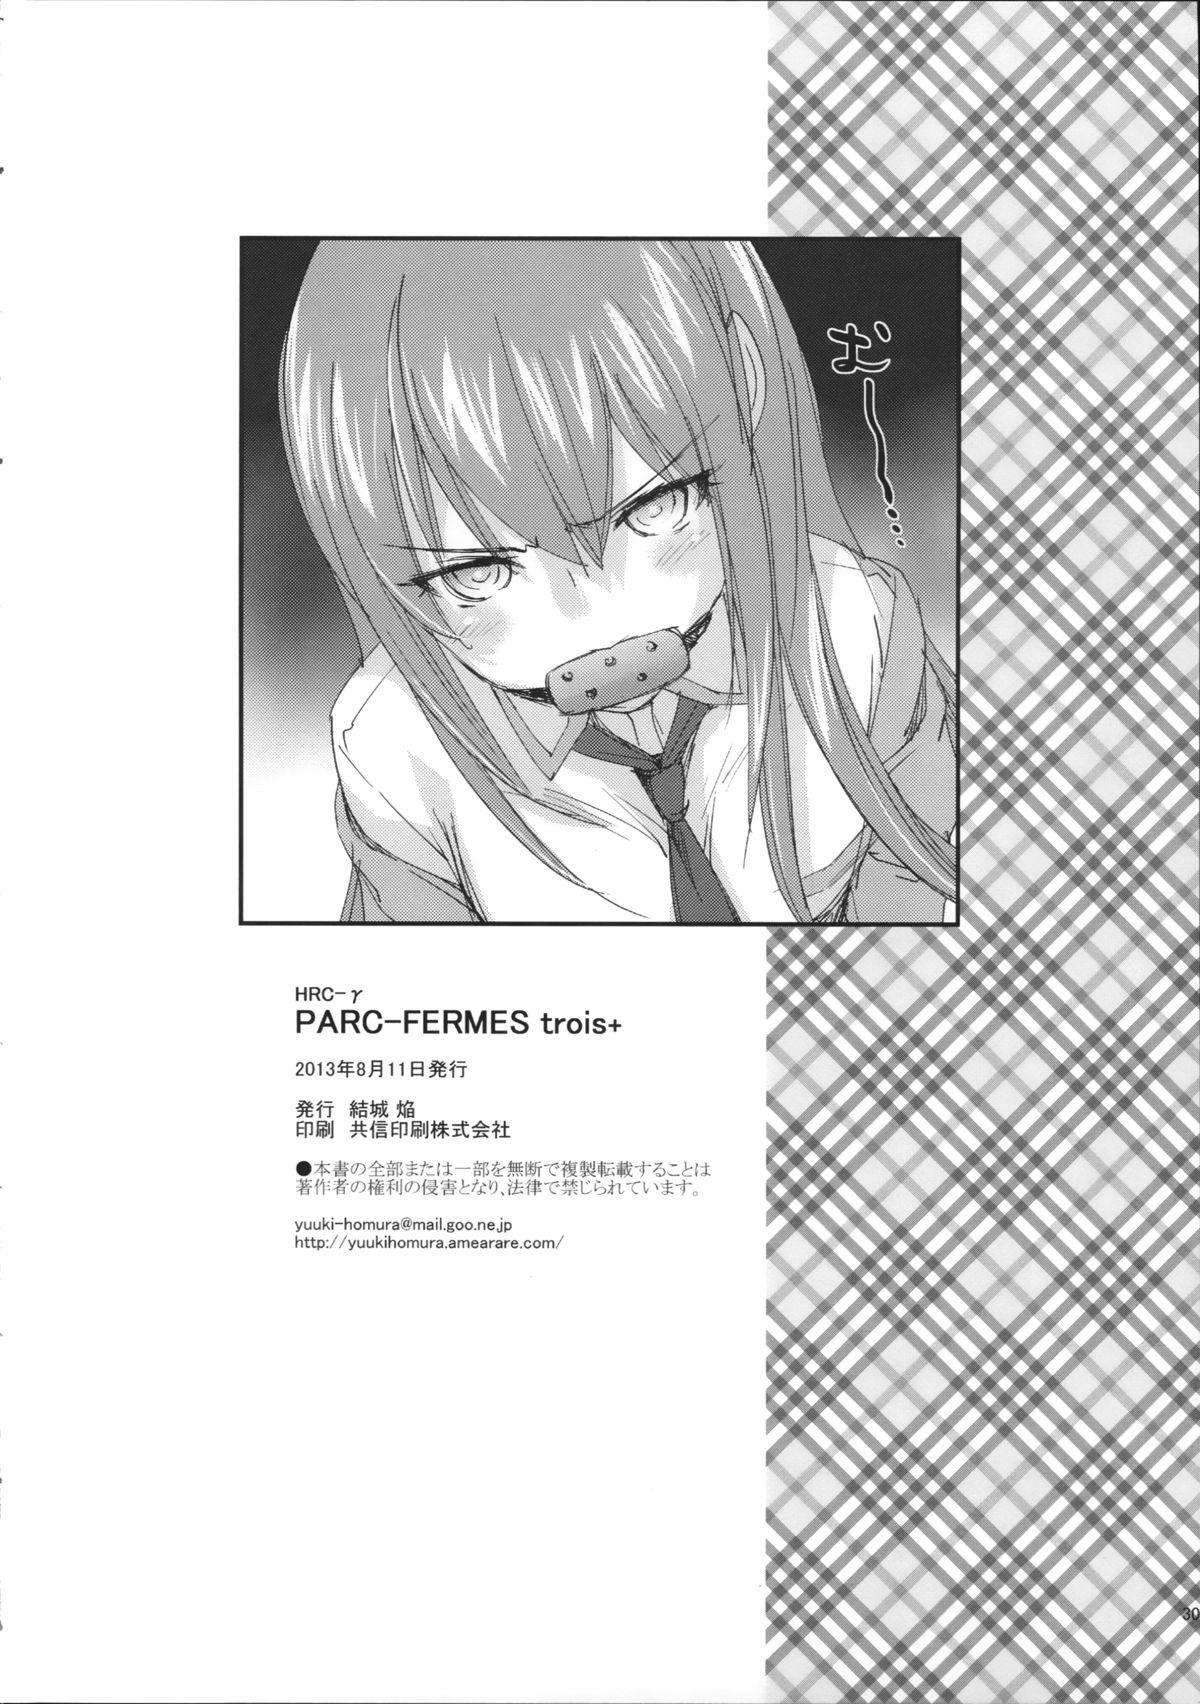 Freaky PARC FERMES TROIS+ - Steinsgate Fat Pussy - Page 30